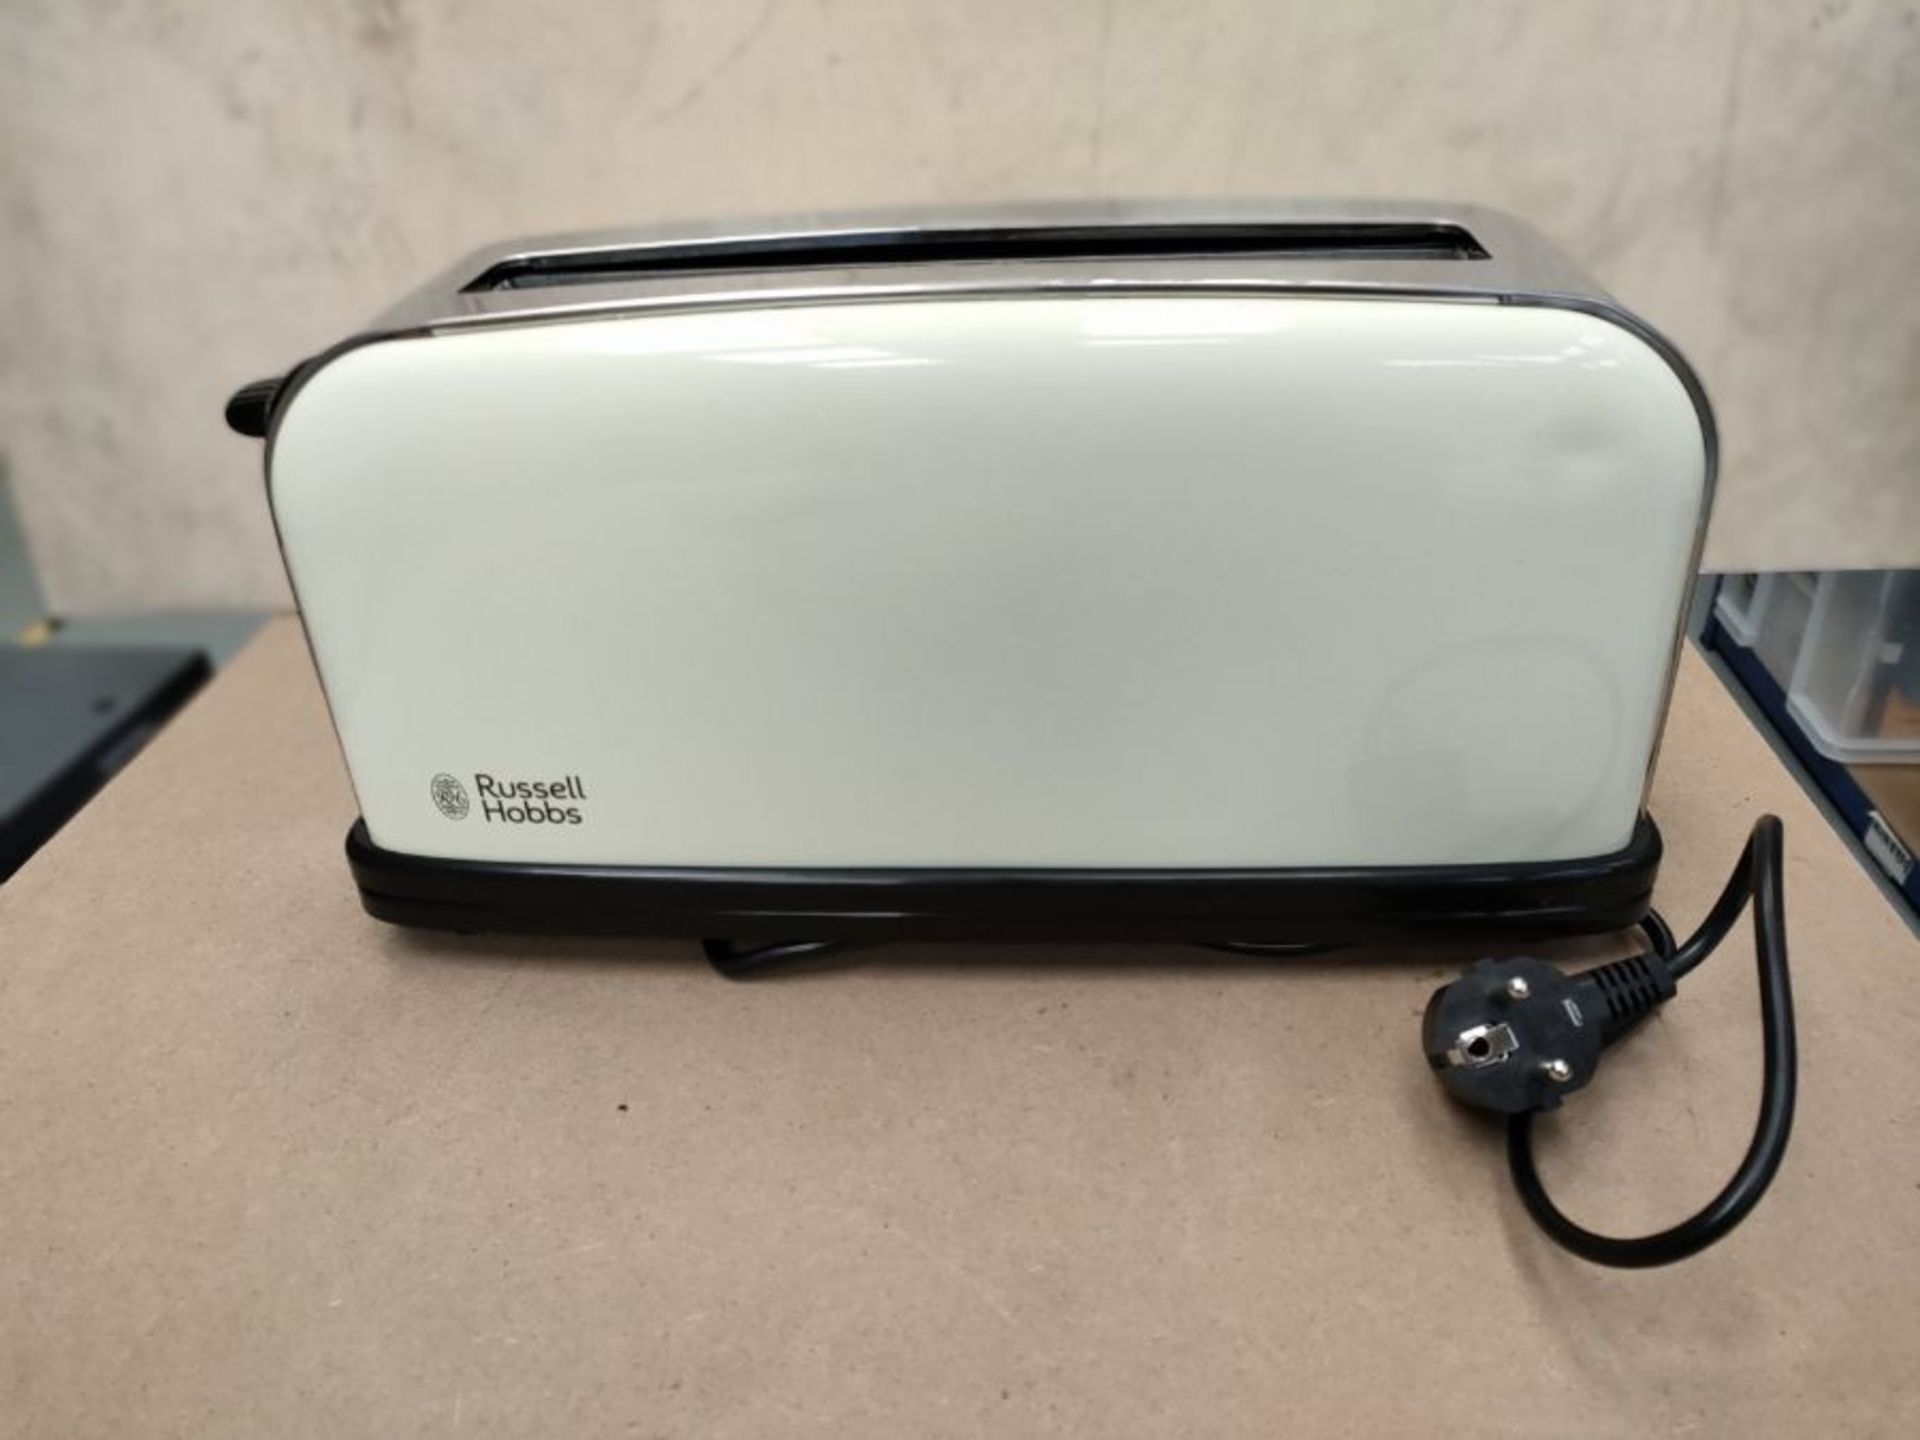 Russell Hobbs 21395-56 toaster - toasters - Image 3 of 3